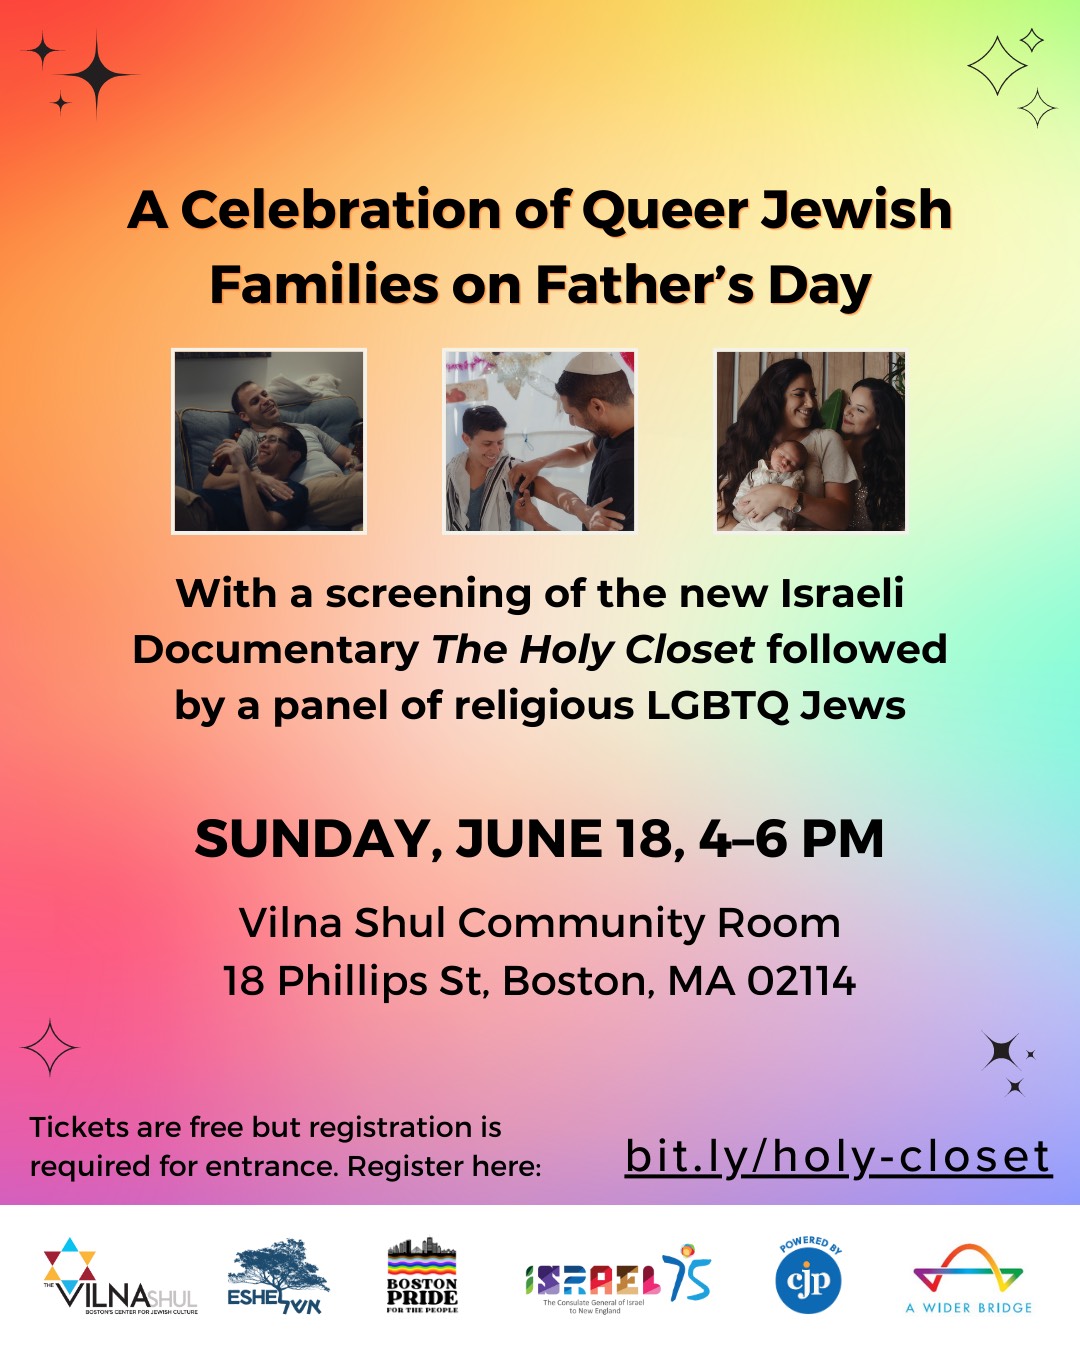 A Celebration of Queer Jewish Families on Father's Day | with a screening of the new Israeli documentary The Holy Closet followed by a panel of religious LGBTQ Jews | Sunday, June 18, 4-6pm | Vilna Shul Community Room, 18 Phillips St, Boston, MA 02114